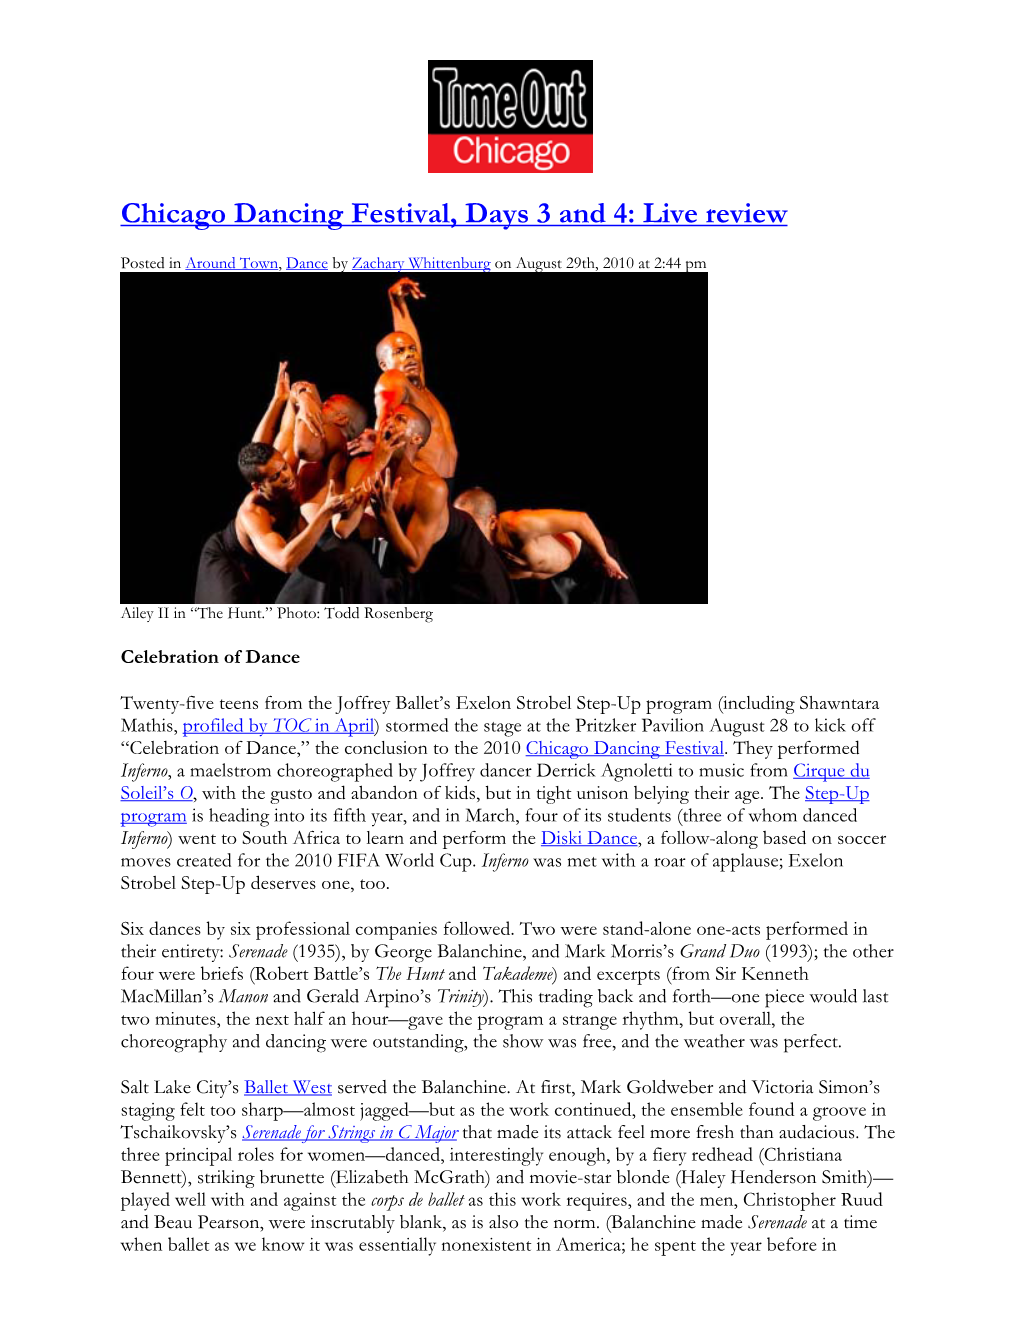 "Chicago Dancing Festival, Days 3 and 4: Live Review"